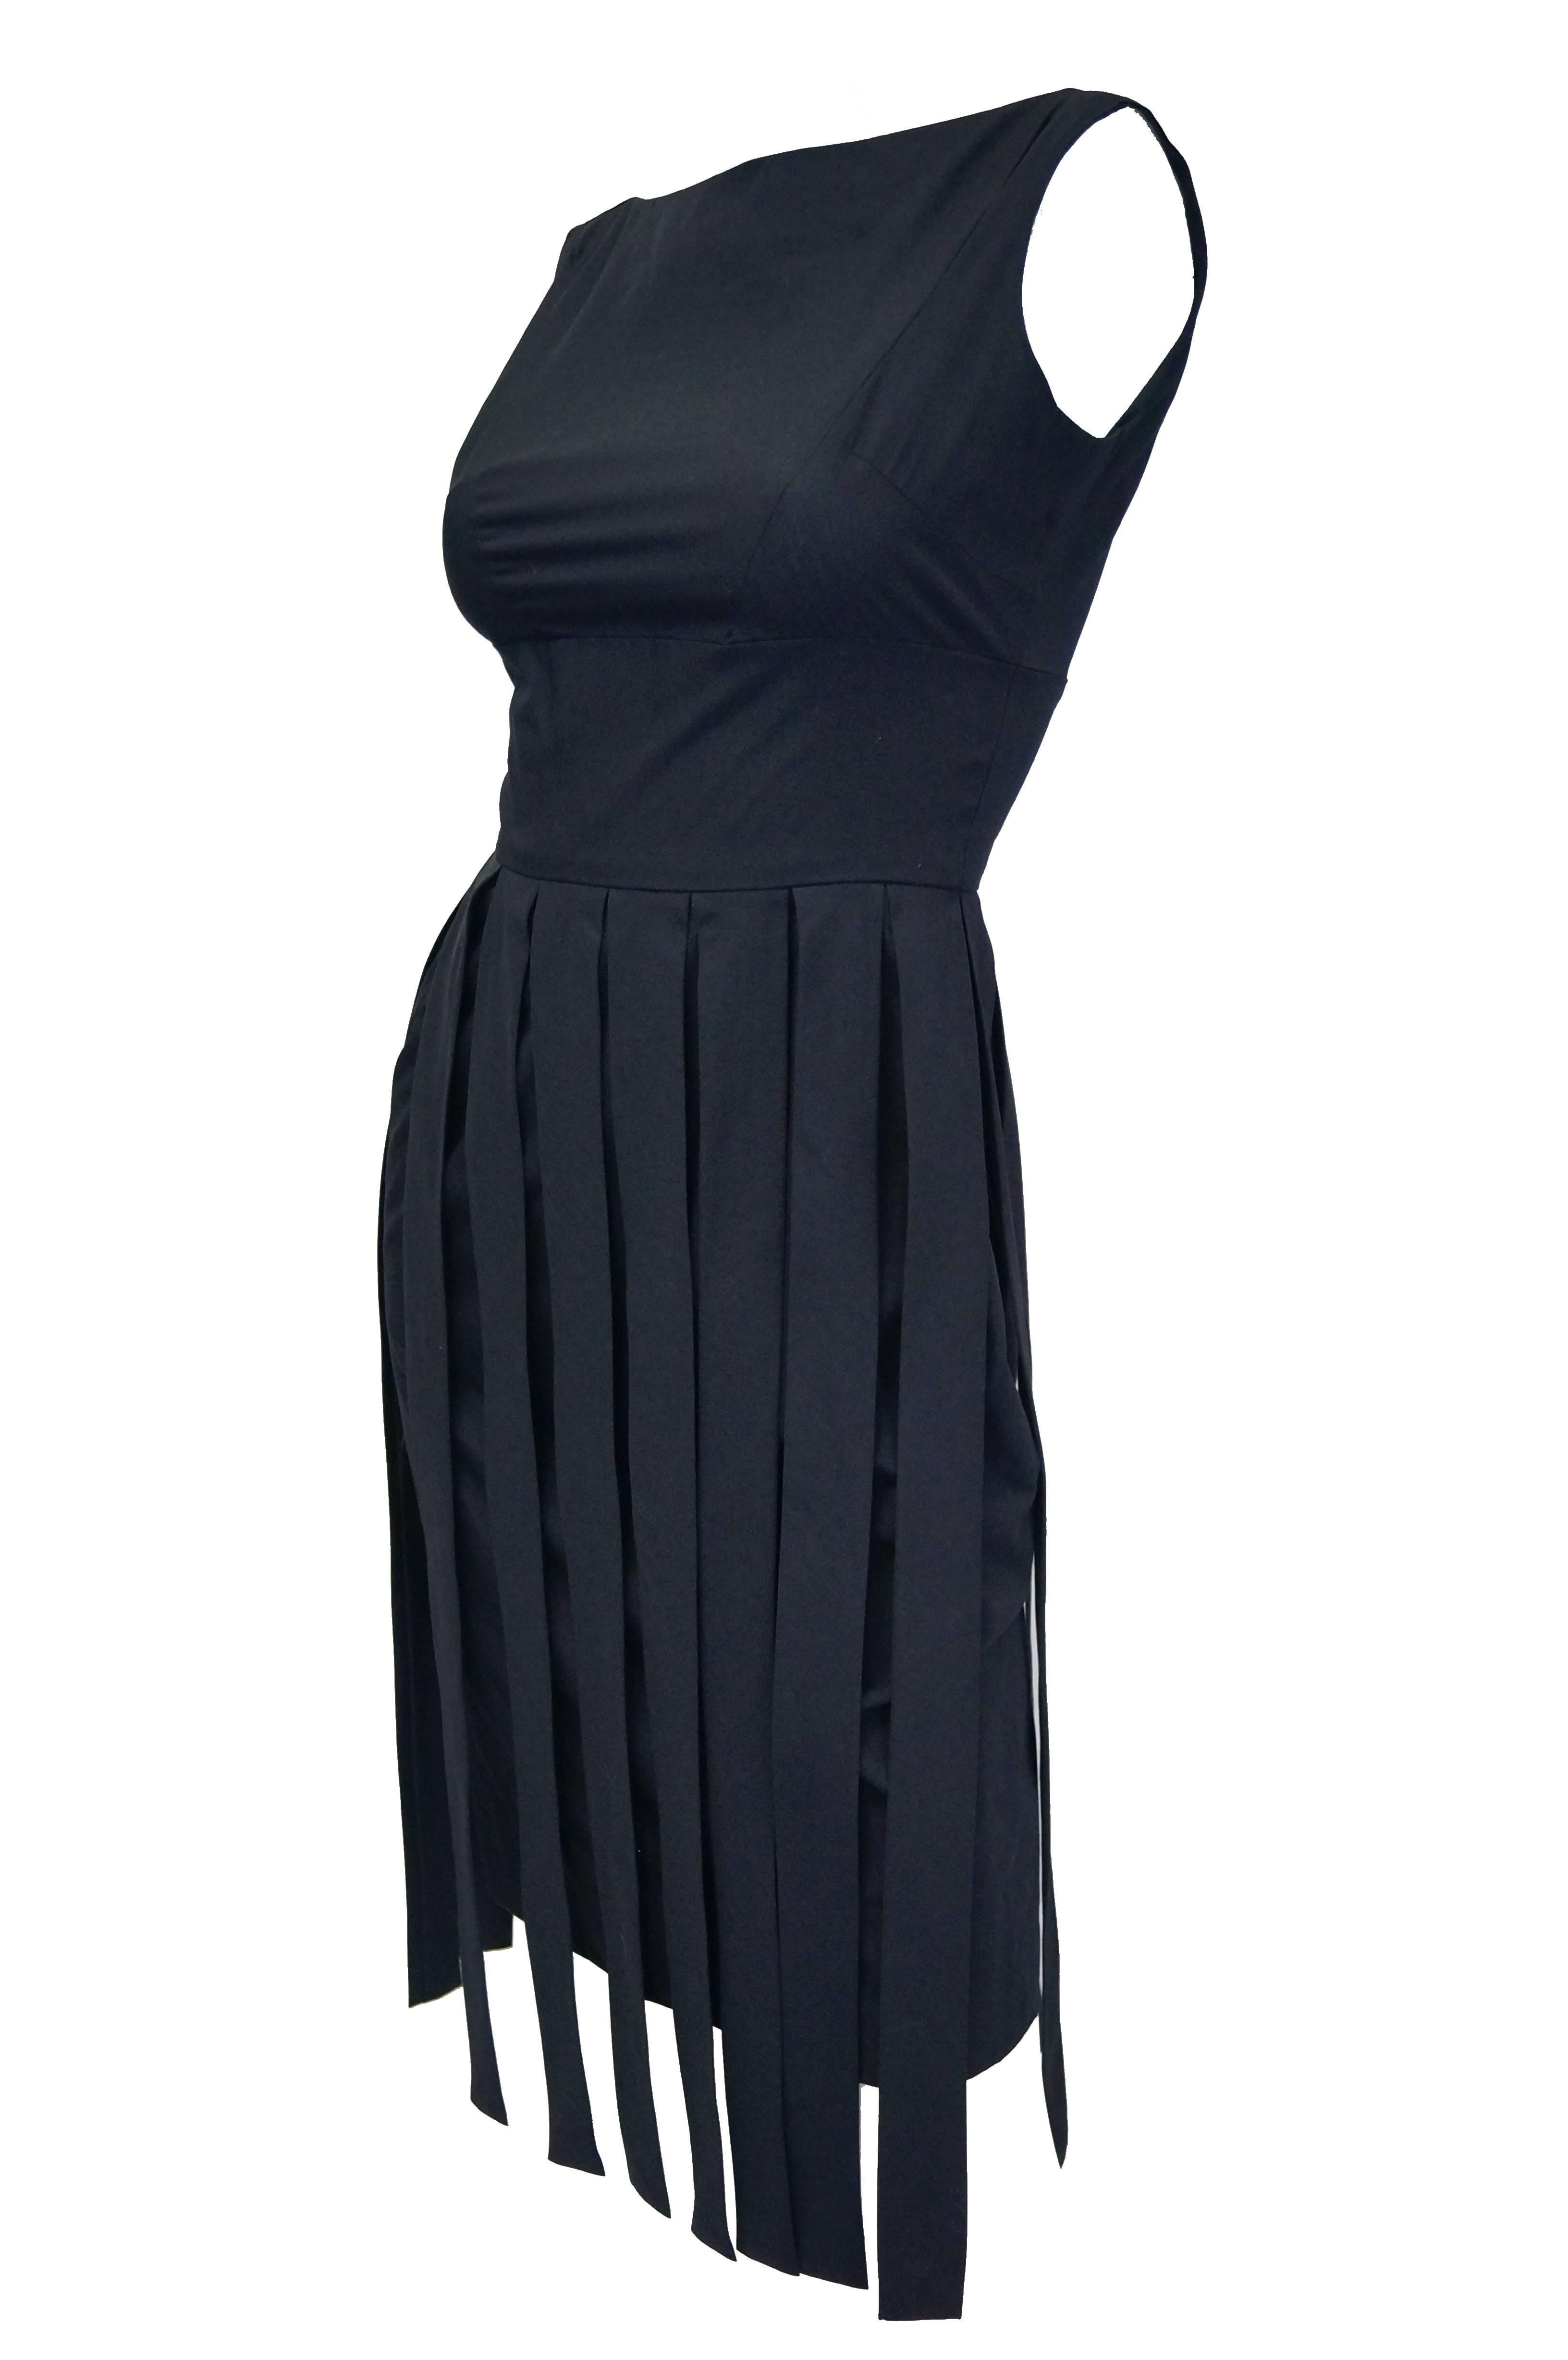 Beautiful body-skimming black cocktail dress by Jaques Heim! The sleeveless dress features a bateau neck with a triangular plunge back. The pencil skirt of the dress is layered below strips of fabric, bringing to mind a cleanly deconstructed knife